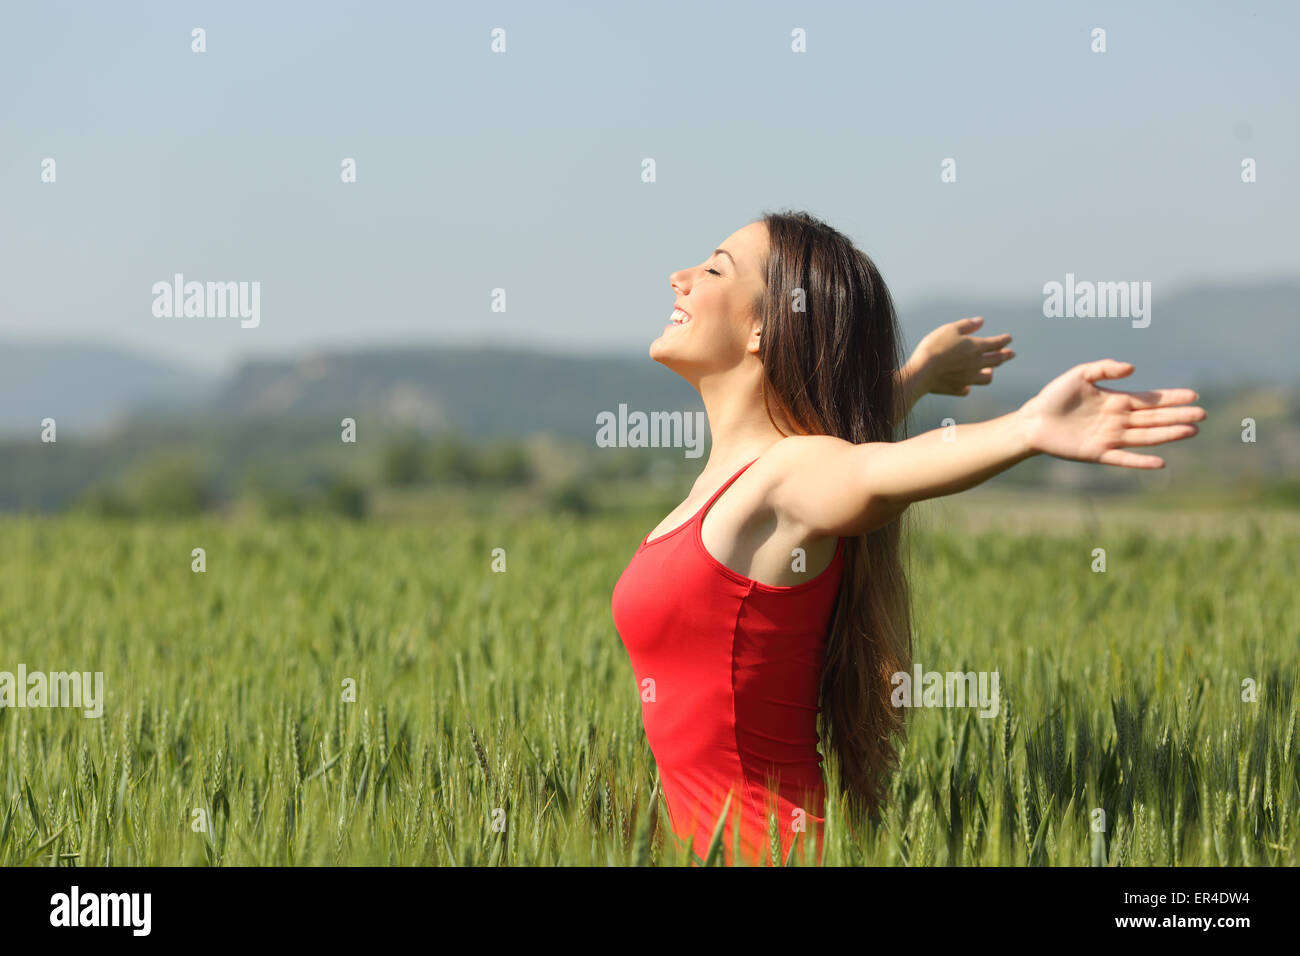 Woman breathing deep fresh air in a green wheat field wearing a red shirt Stock Photo